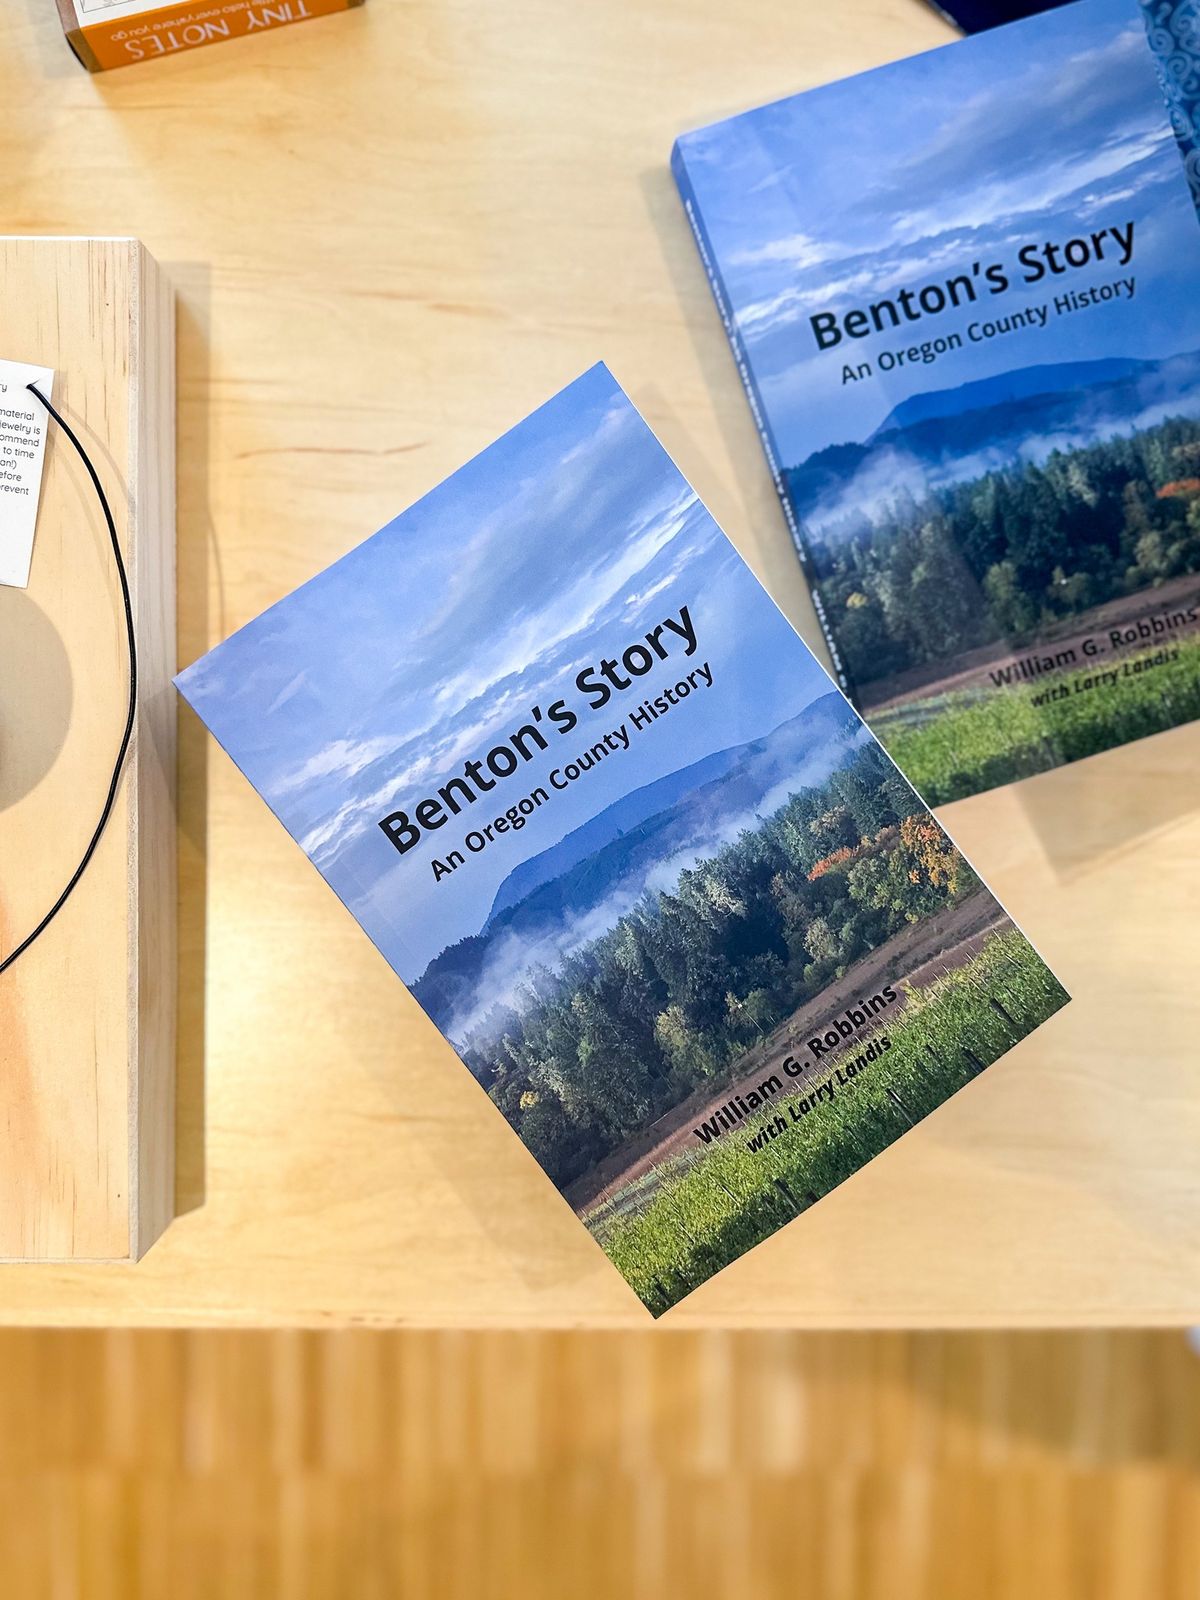 "Benton's Story" Book Signing with Bill Robbins & Larry Landis